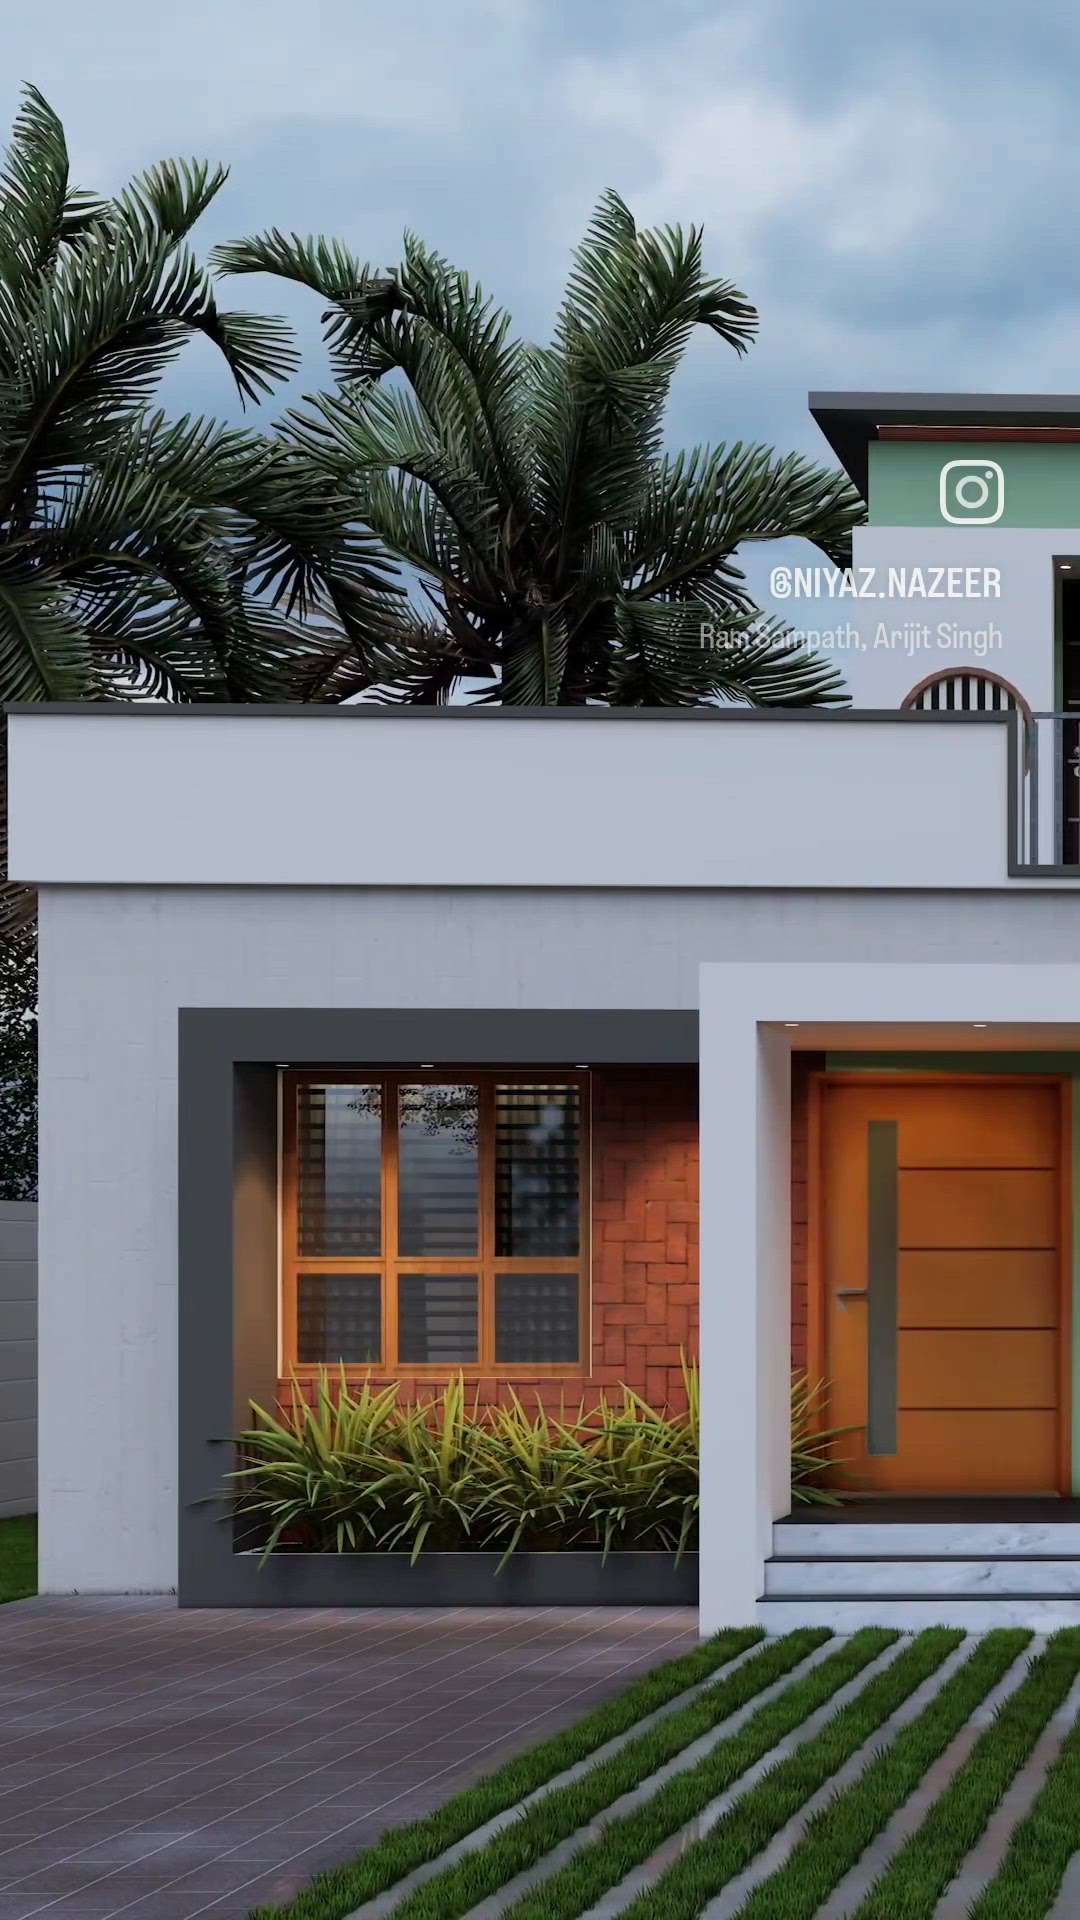 Dm to prepare 3d elevation of your dream home at low cost
Wh: 8h 0h 7h 5h 4h 7h 8h 1h 6h 0h

#keralahomes
#viralhomes
#keralahouse
#keralahome3delevation
#3dvisualization
#keralaviral
#architecture
#archidesignhome
#architecturevisualization
#3dvisualization
#3dhomedesign